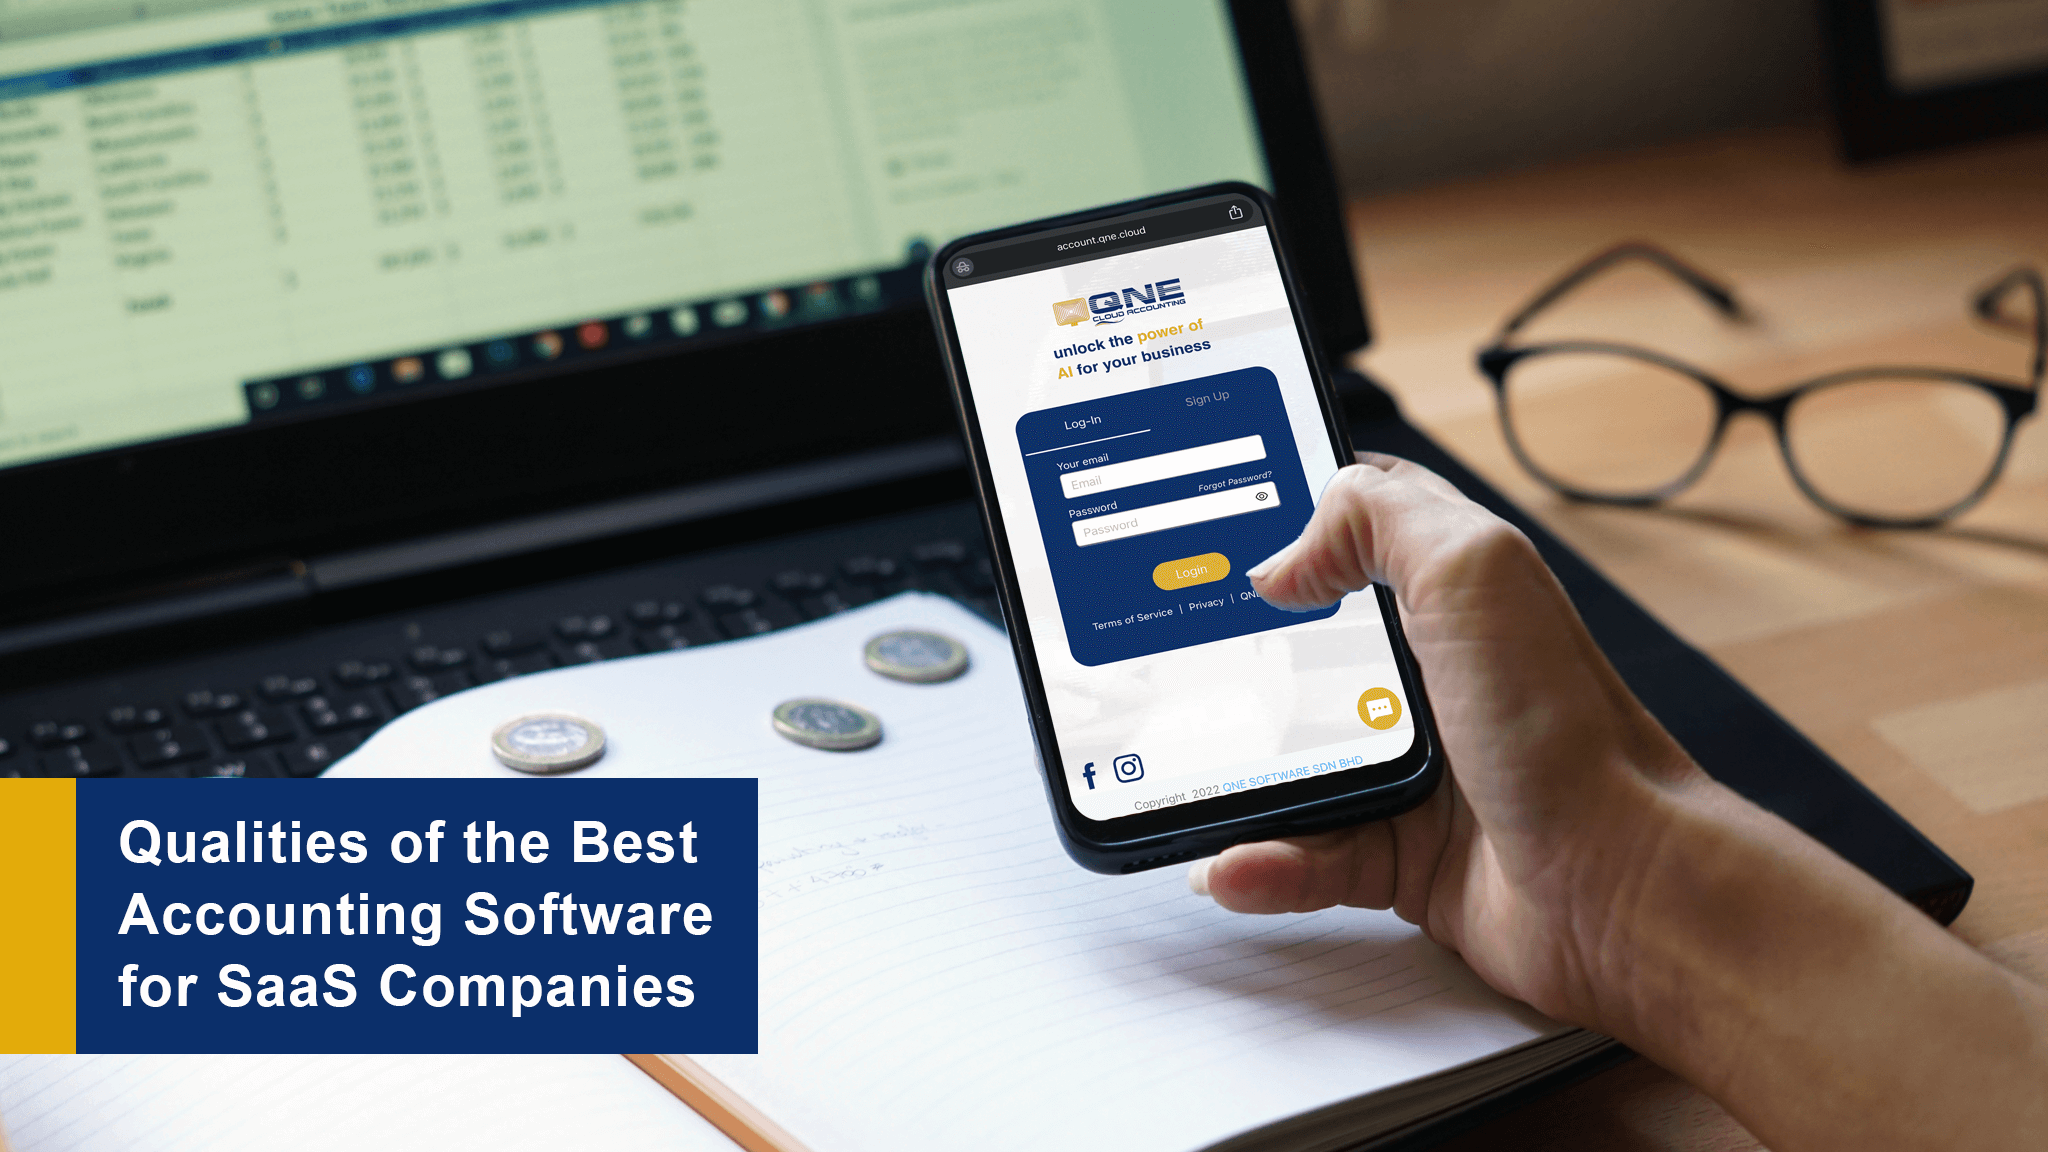 Best Accounting Software for SaaS Companies